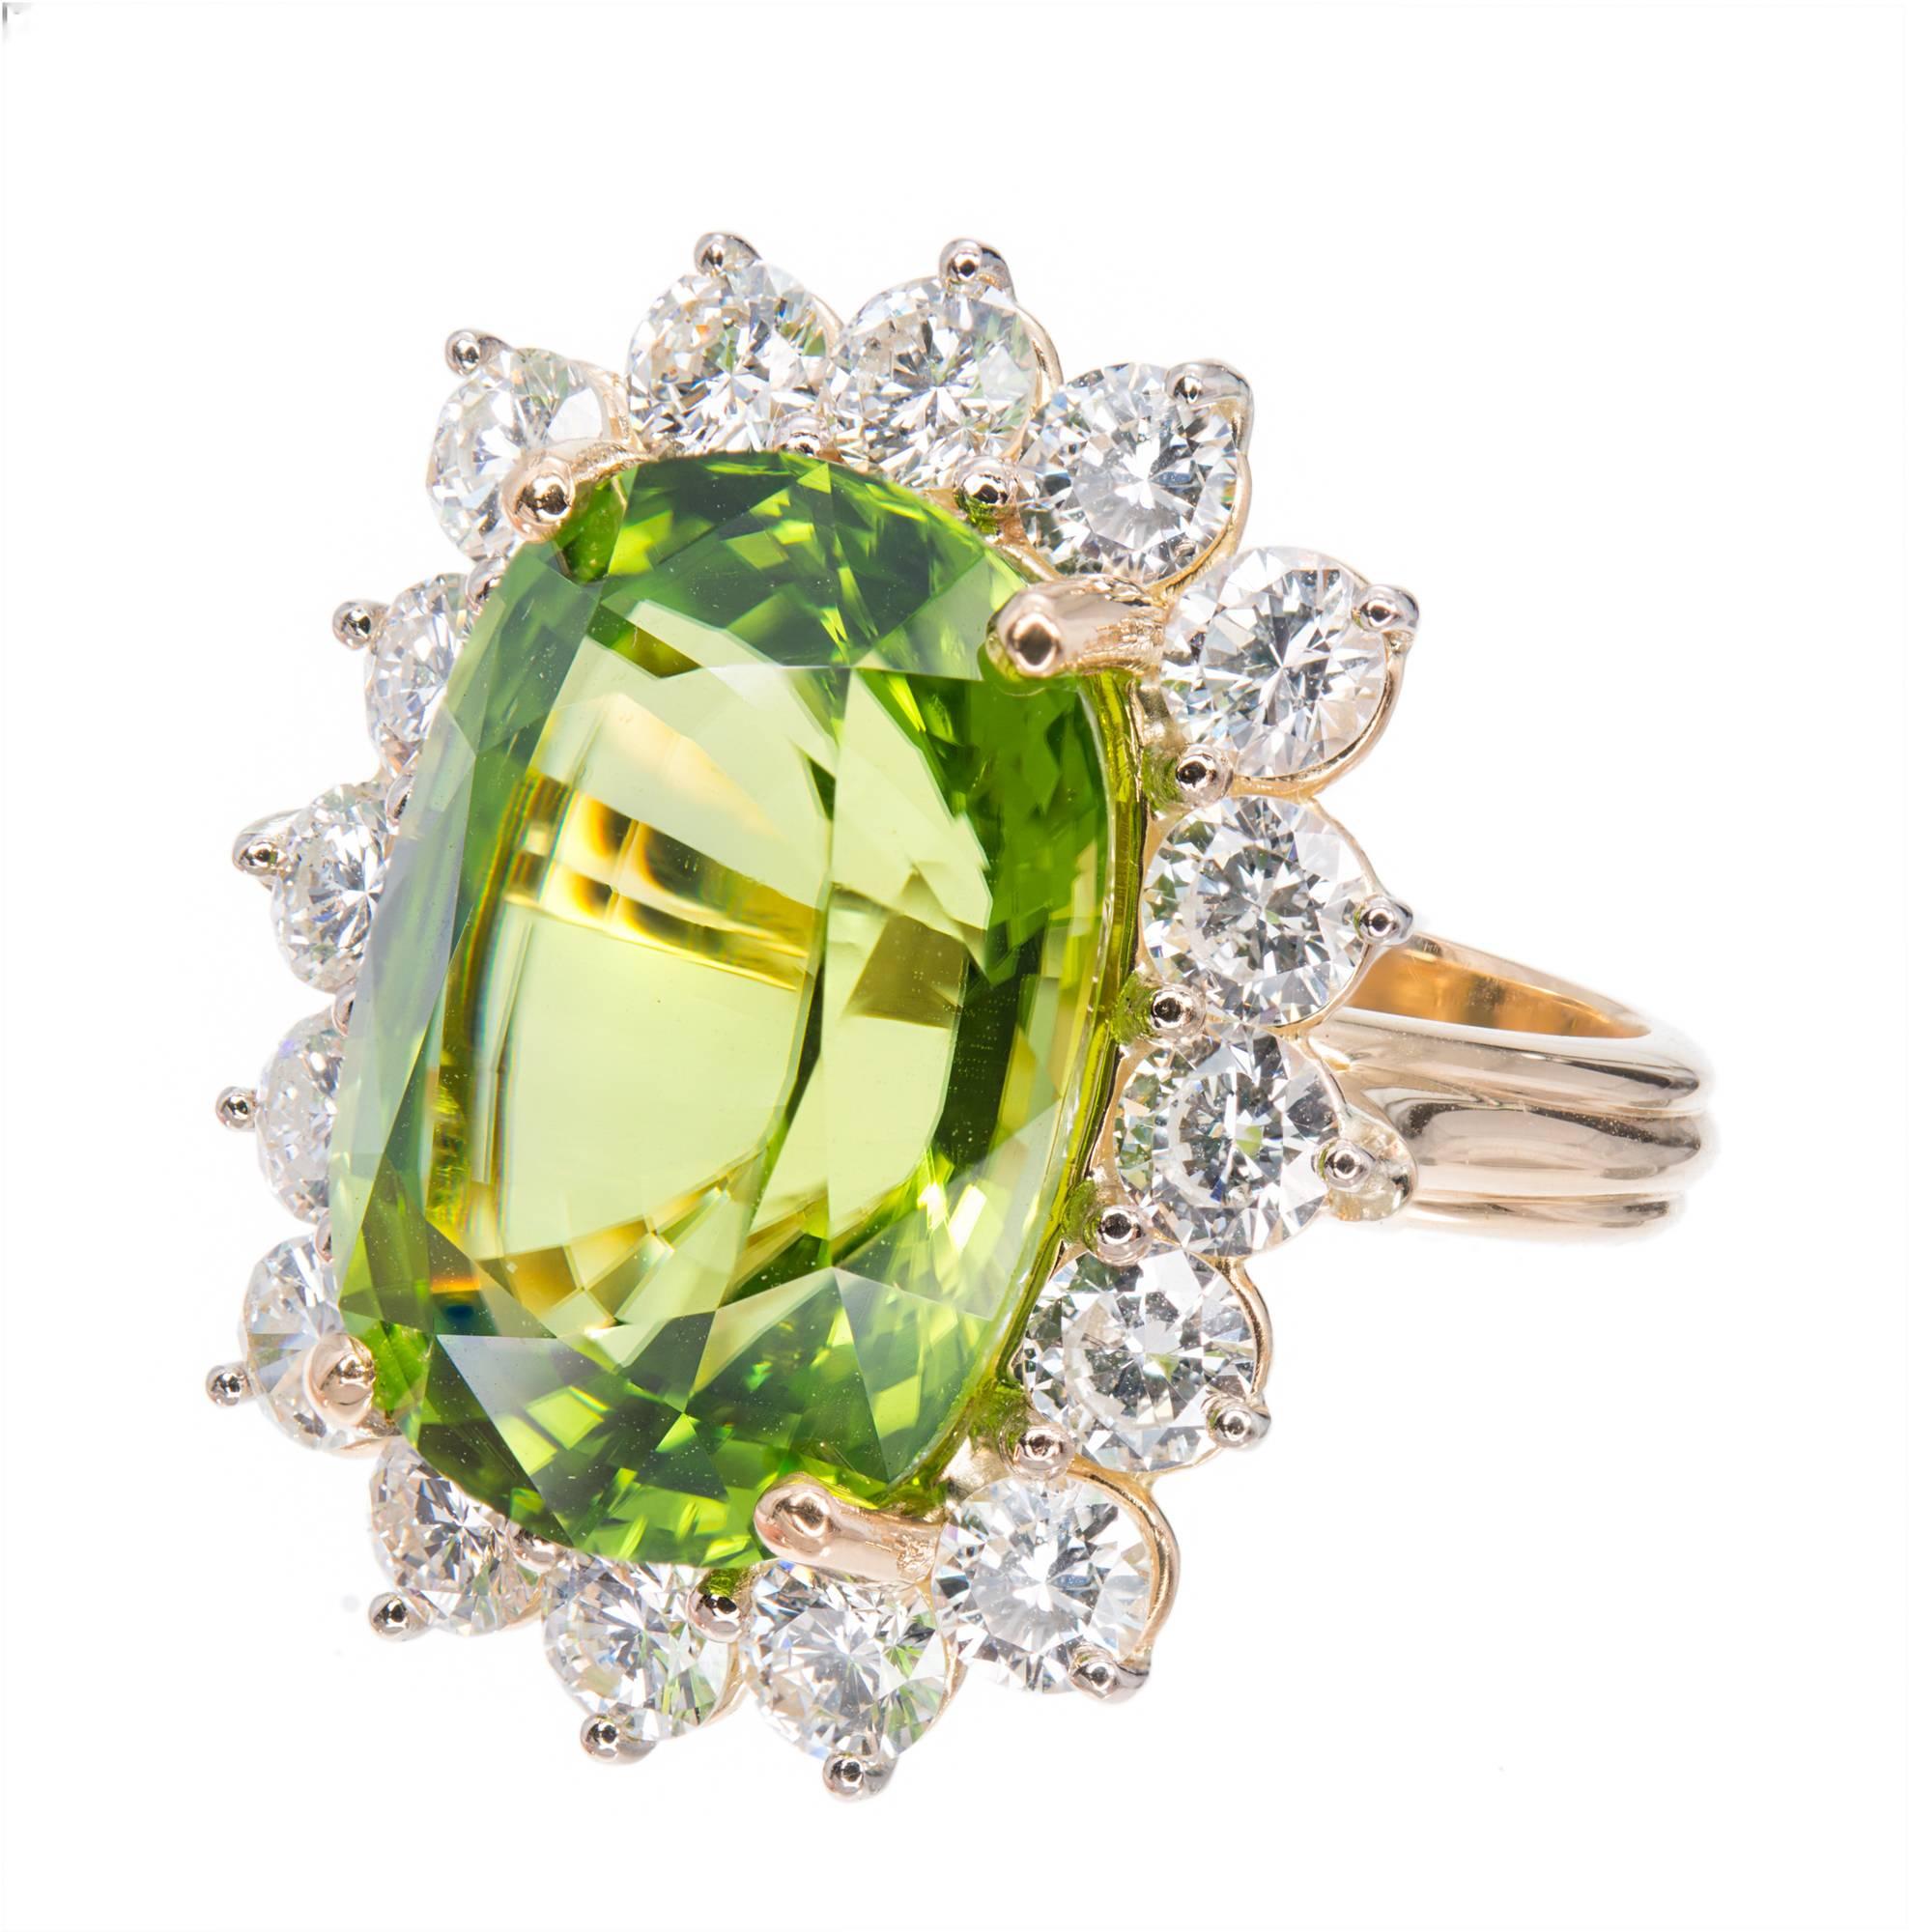 Large cushion Peridot and diamond cocktail ring. GIA certified cushion cut  green with hints of yellow, oval center stone with a halo of 16 round diamonds in 18k yellow and white gold setting. The ring was designed and made in the Peter Suchy